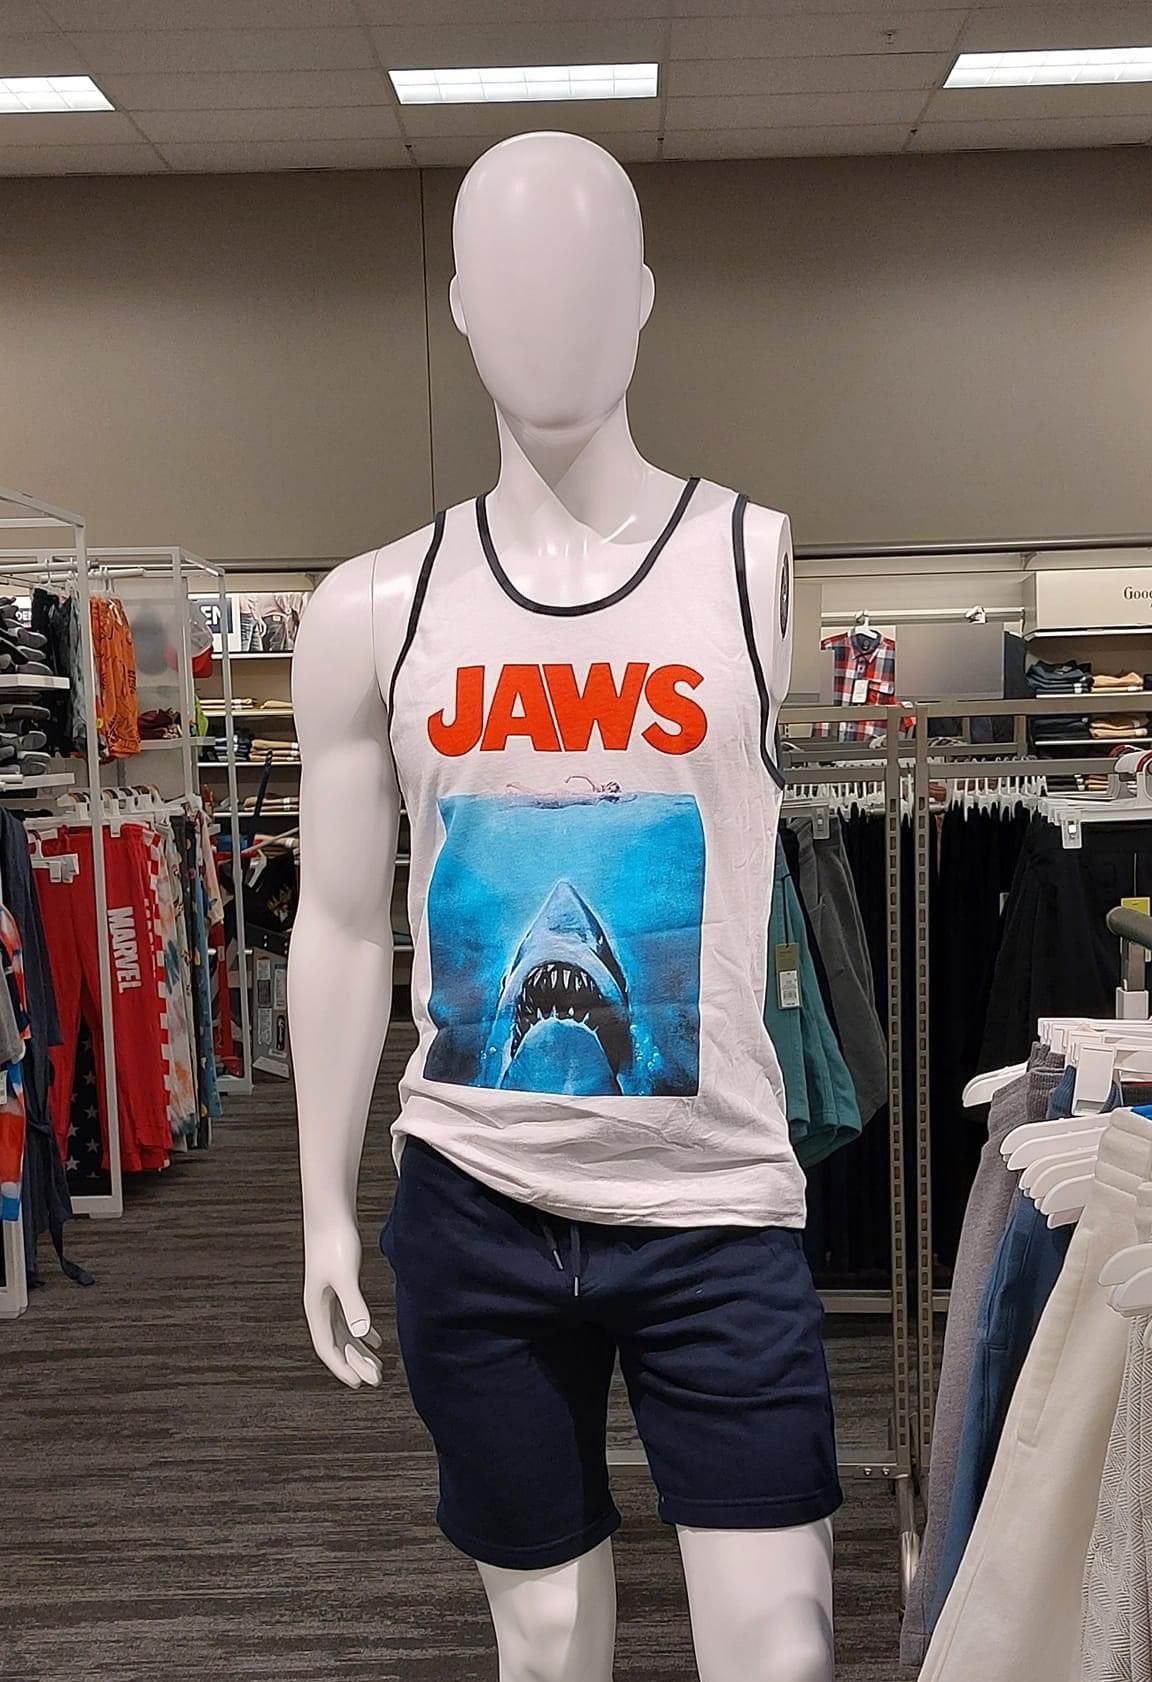 Well played, Target.